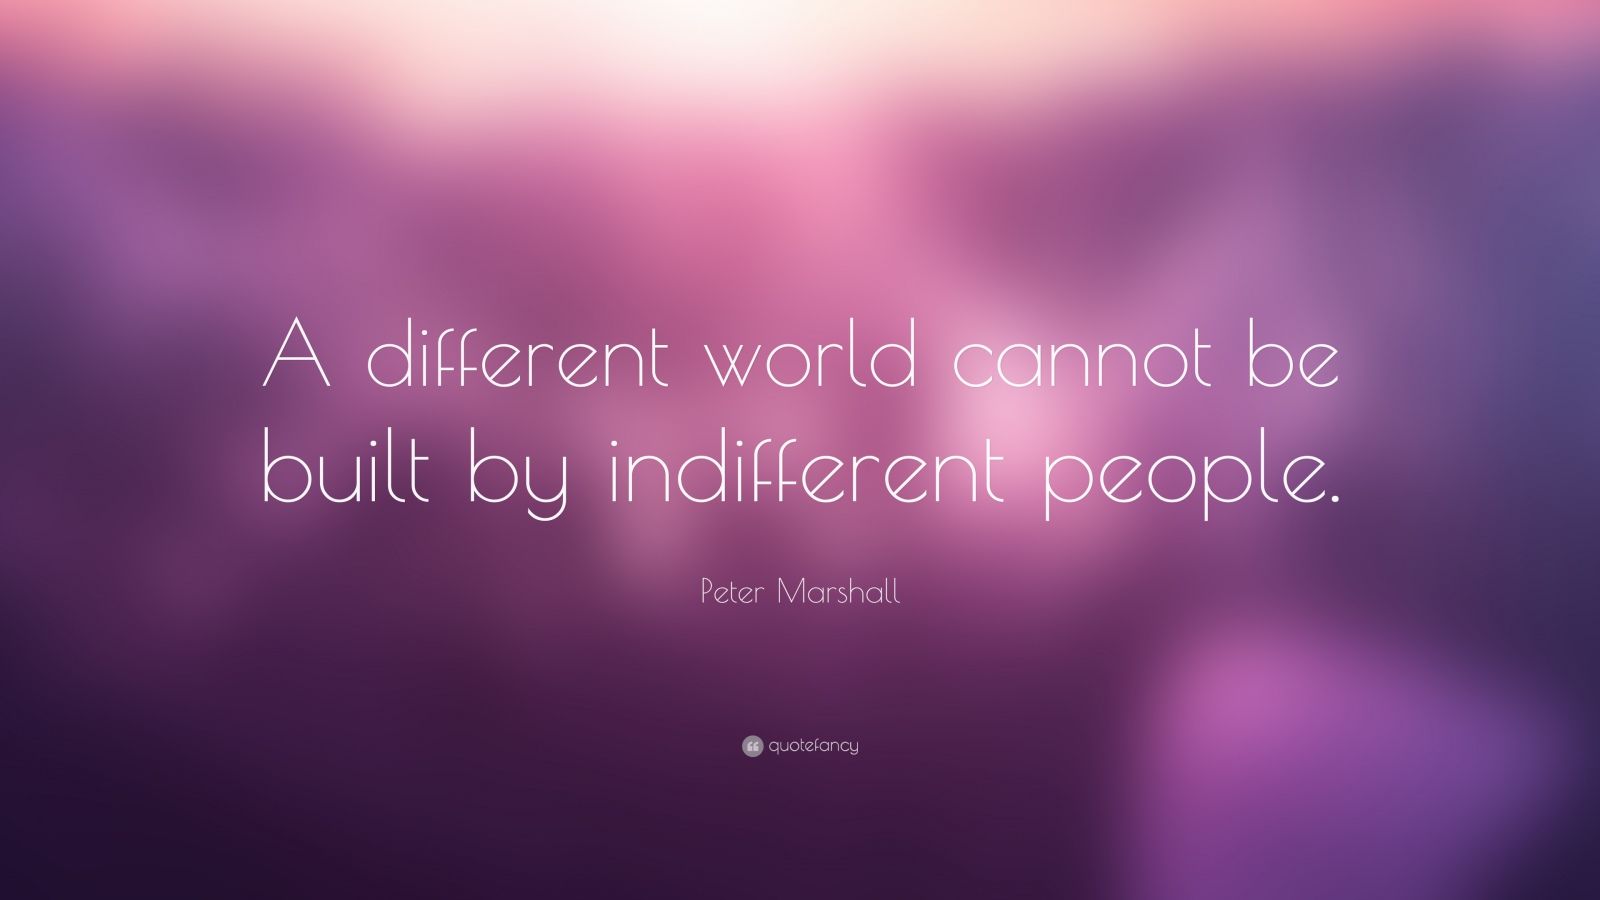 Peter Marshall Quote: “A different world cannot be built by indifferent ...